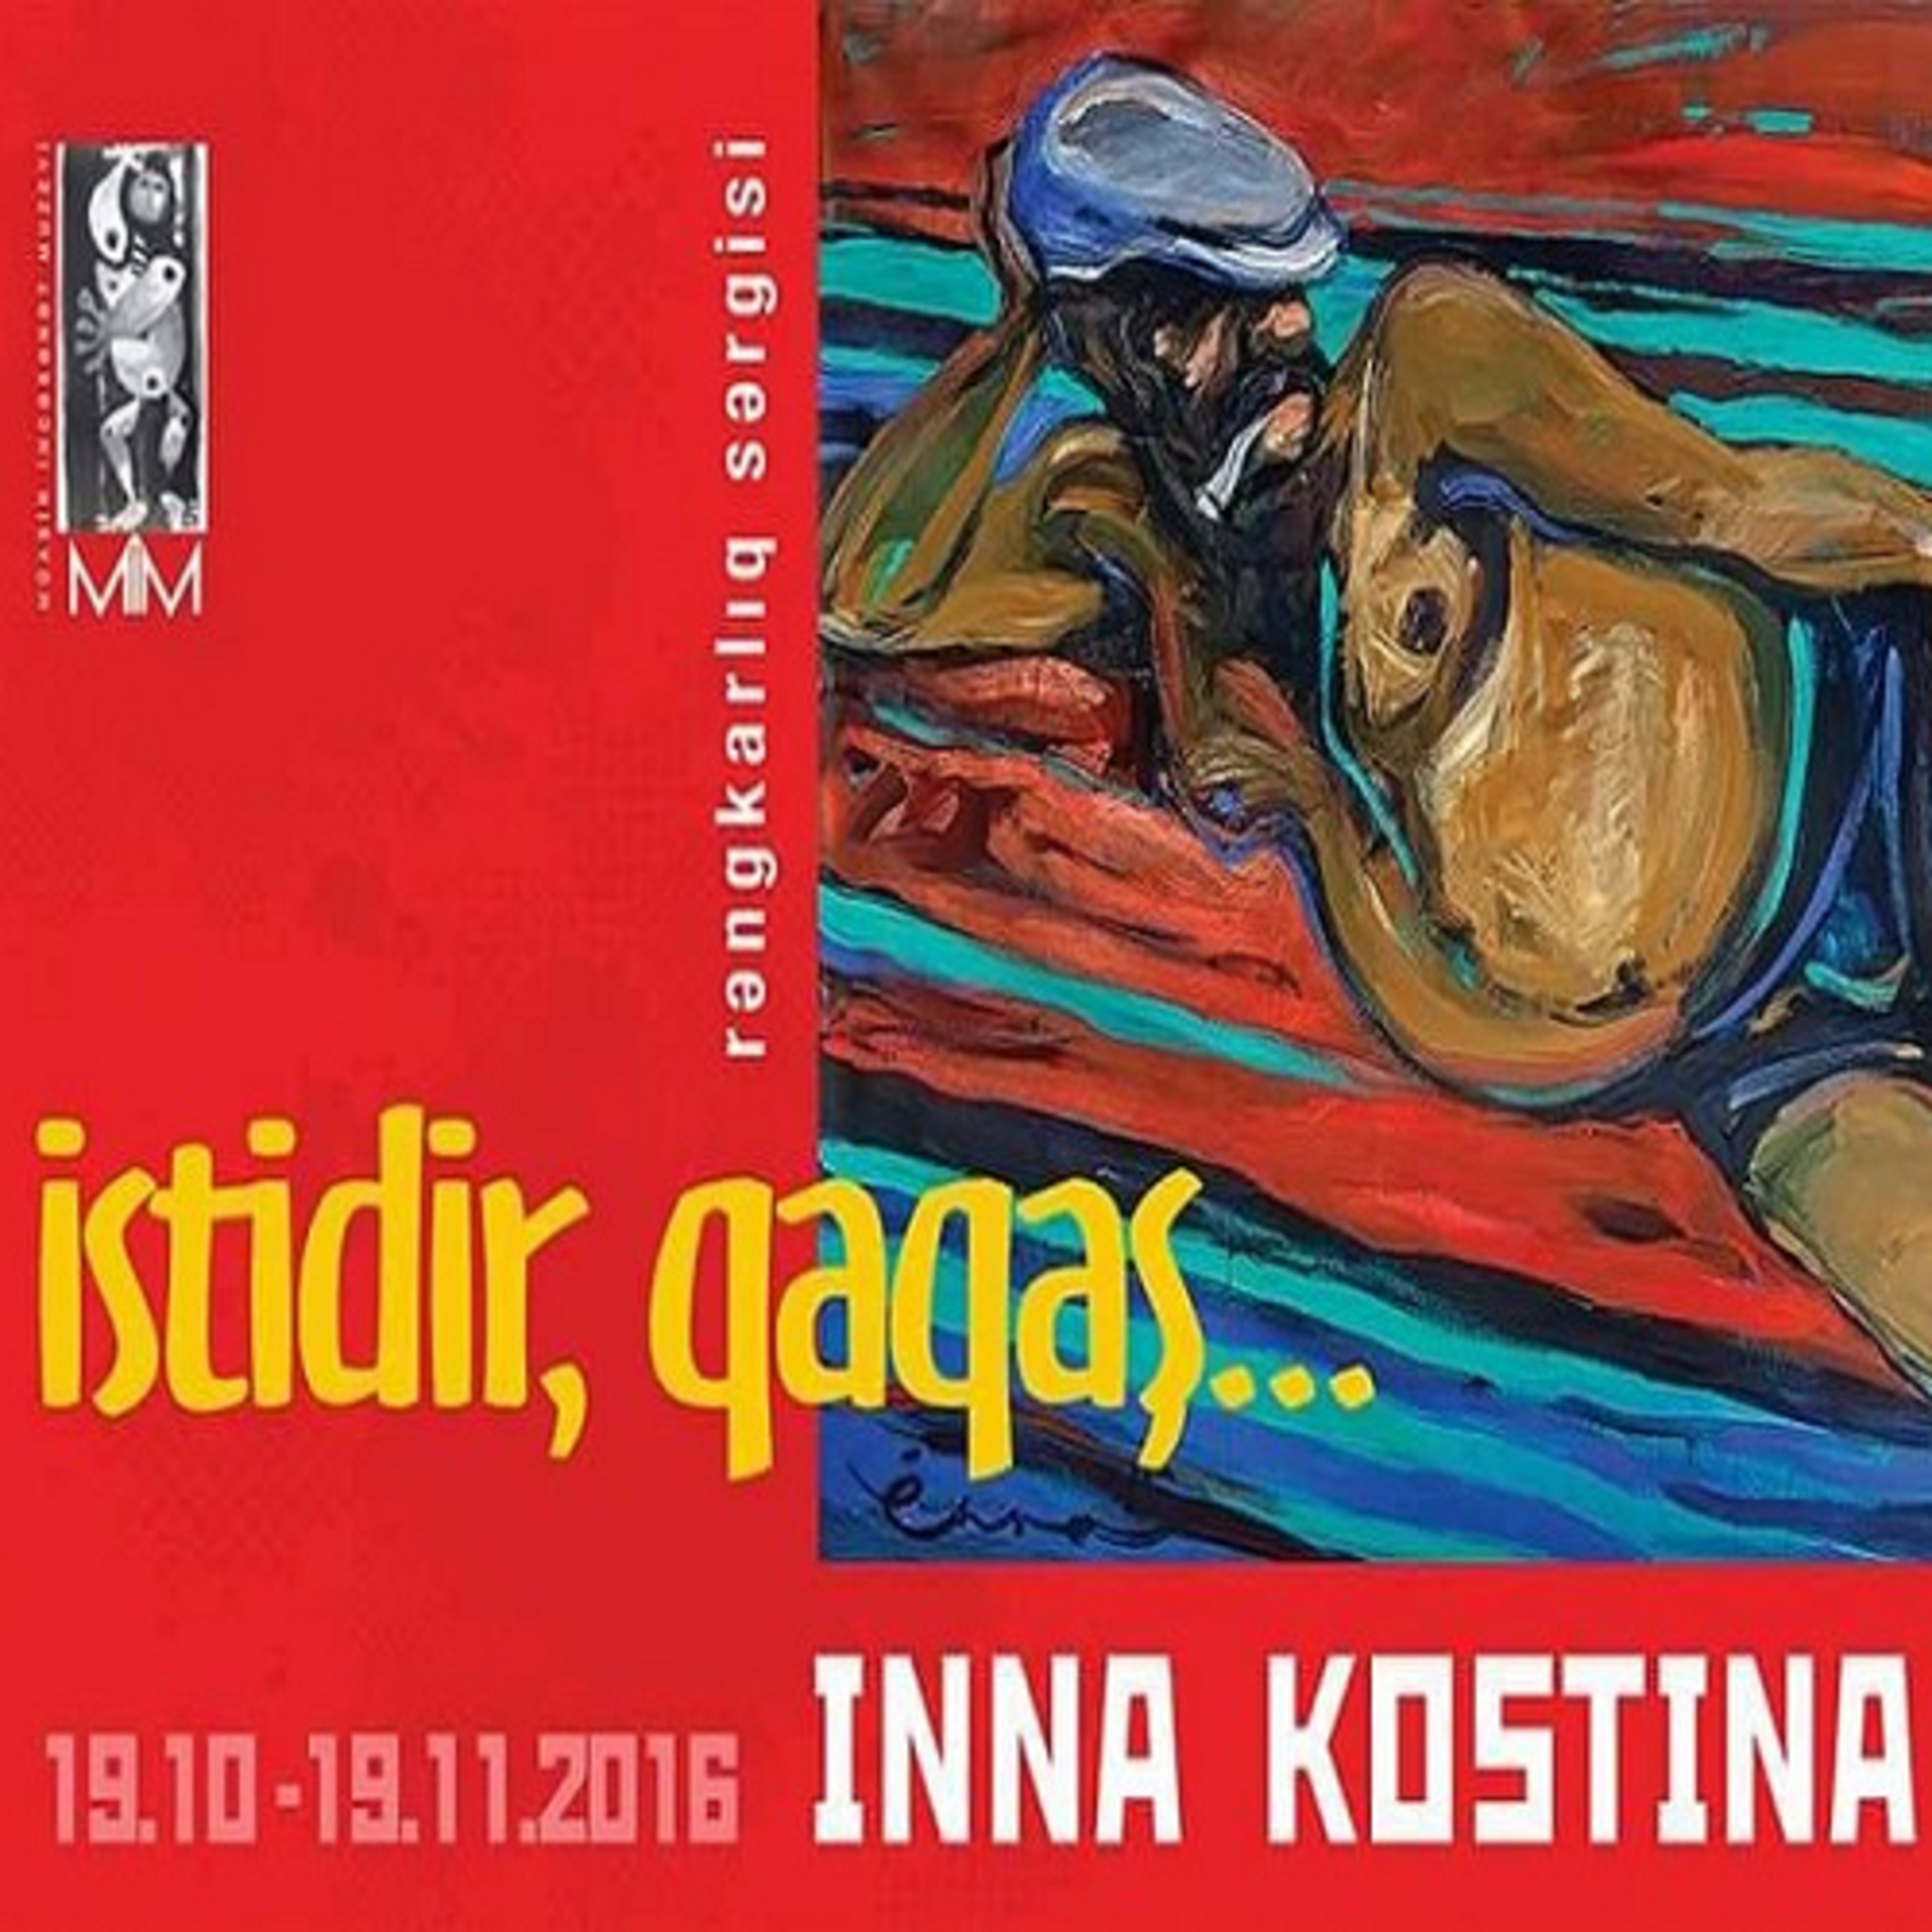 The personal exhibition of Inna Kostina hot, gagash